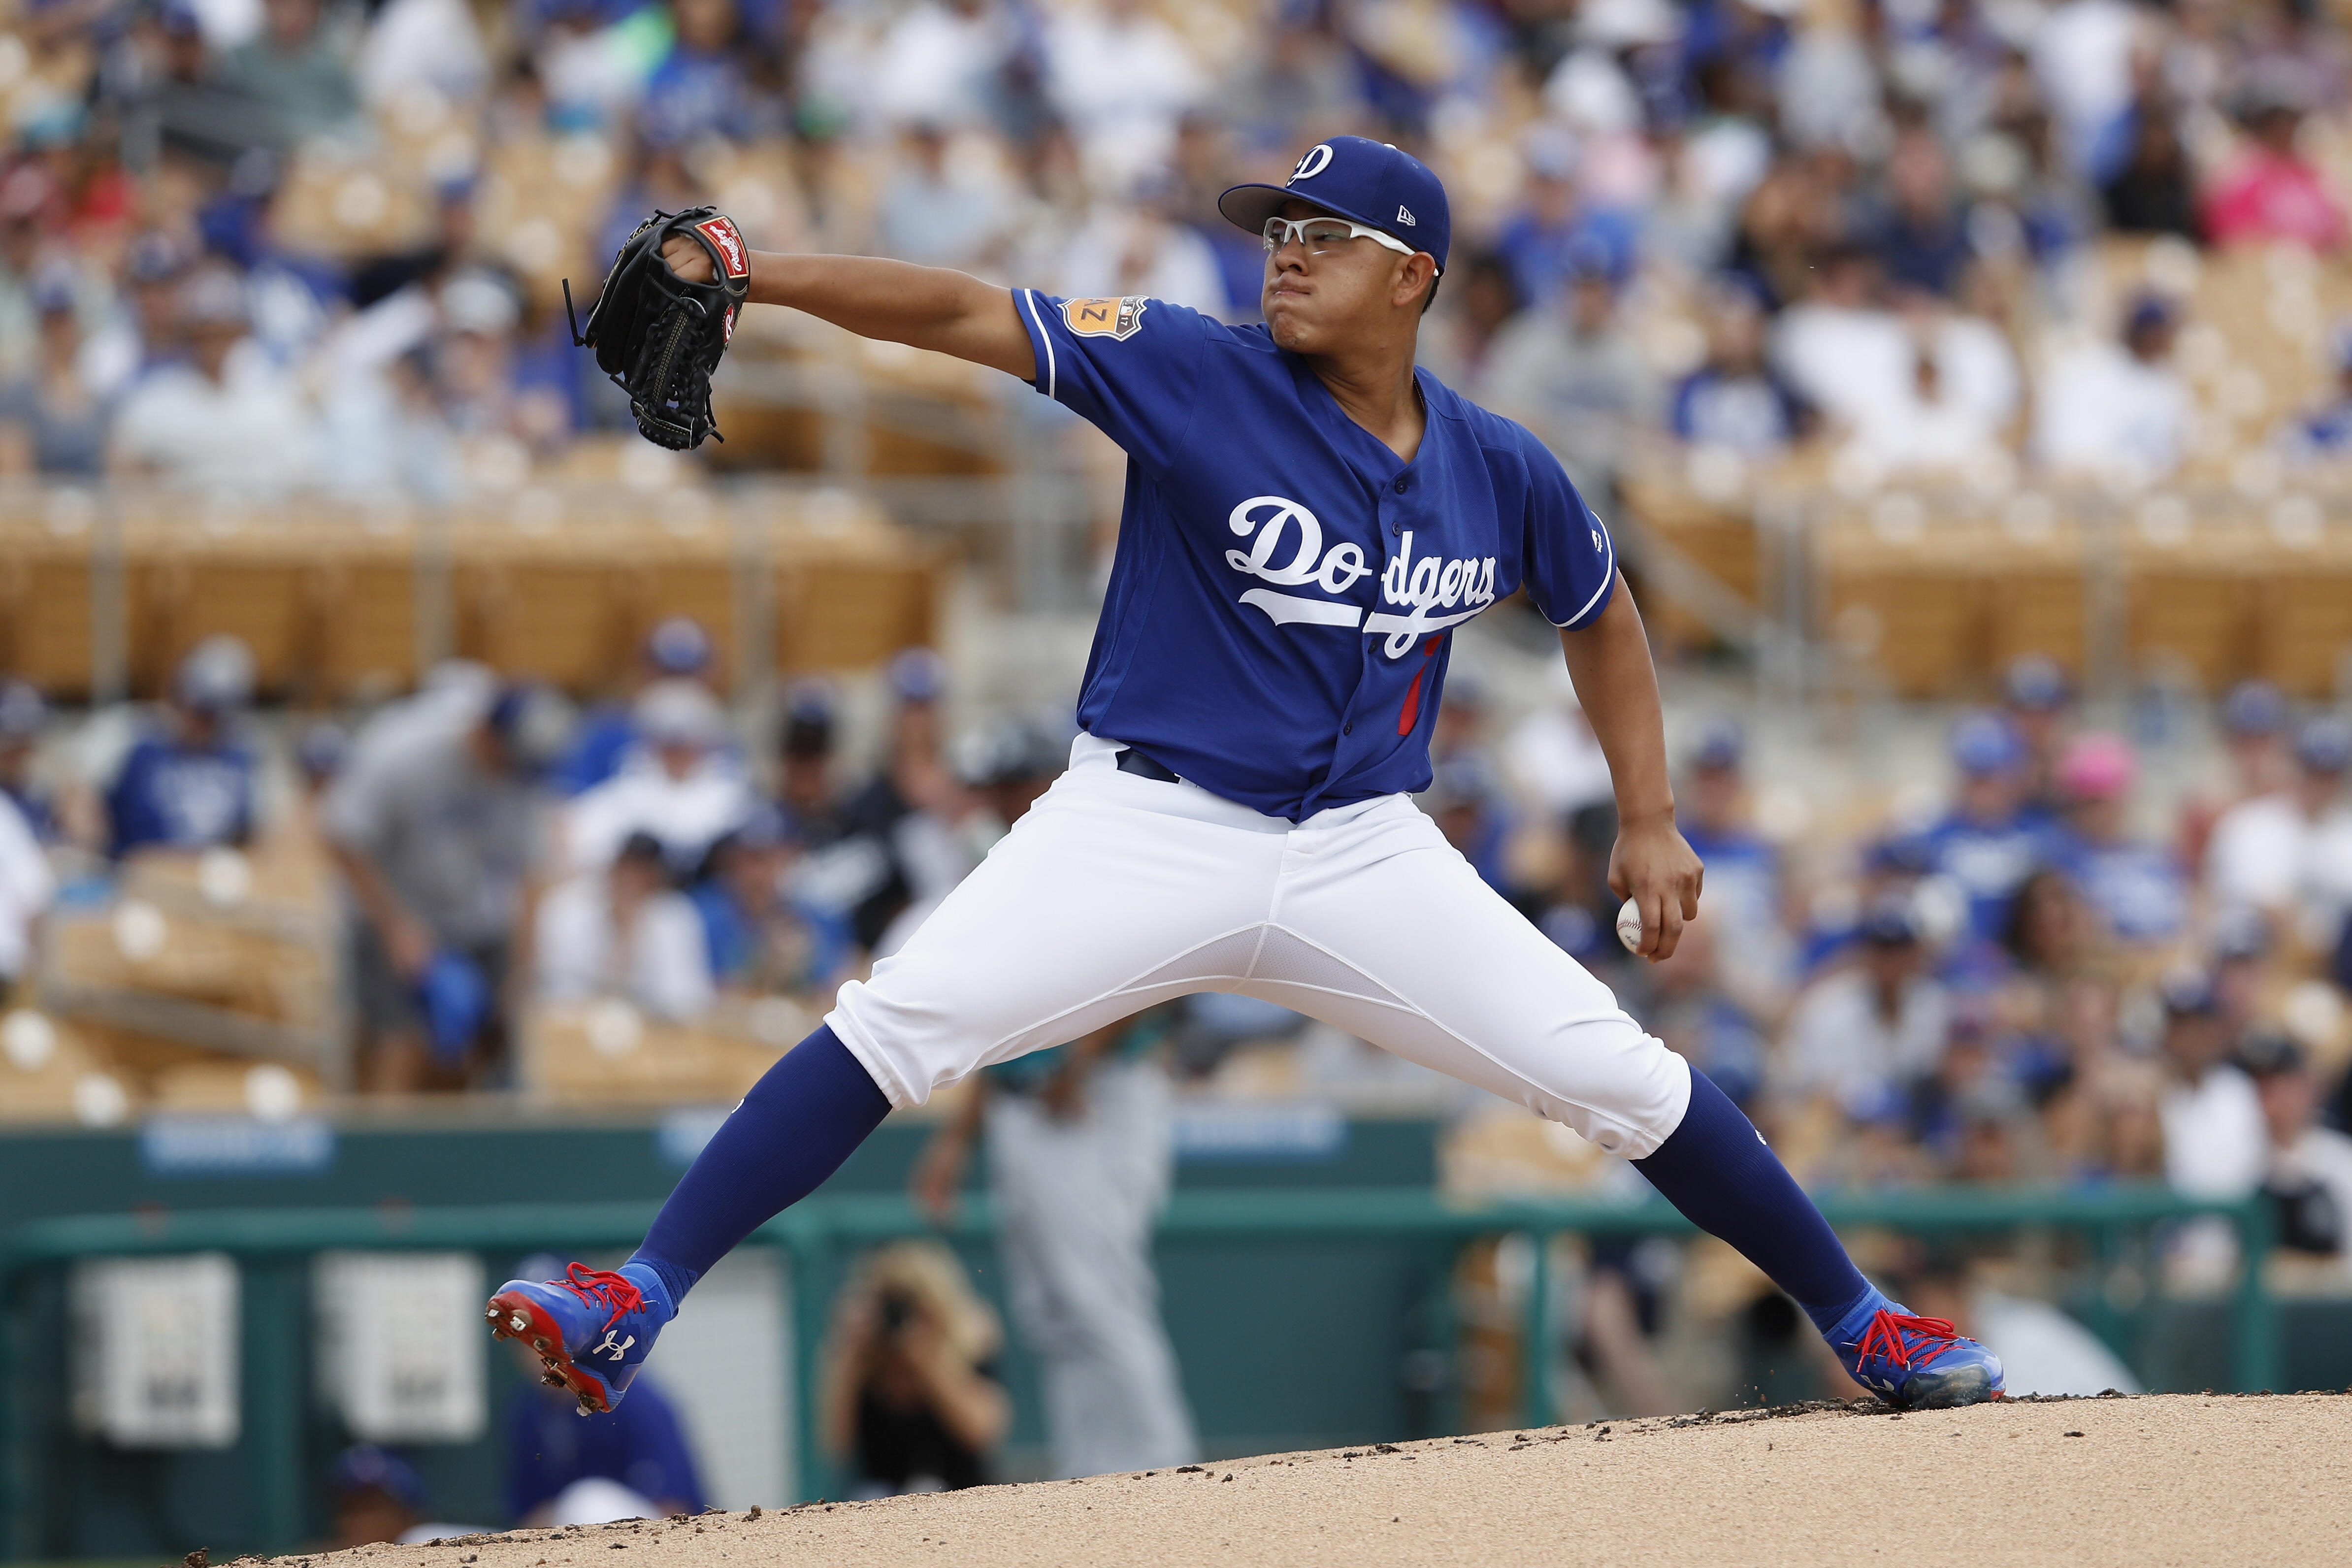 GLENDALE, AZ - MARCH 05:  Julio Urias #7 of the Los Angeles Dodgers pitches in the first inning against the Seattle Mariners during the spring training game at Camelback Ranch on March 5, 2017 in Glendale, Arizona.  (Photo by Tim Warner/Getty Images)